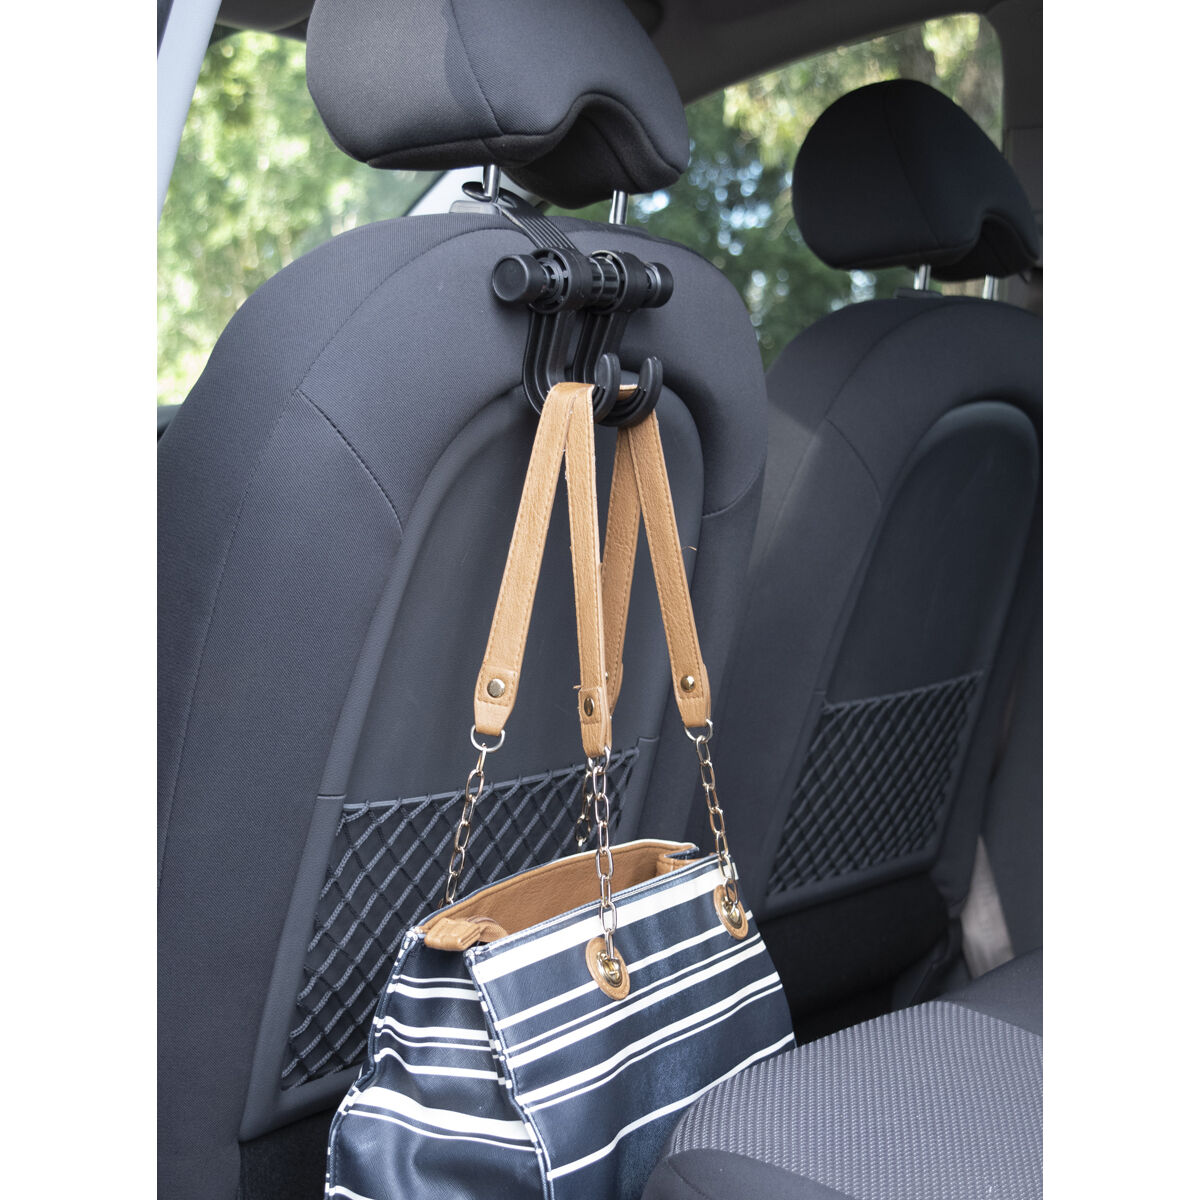 Metal Headrest Hooks for Car, Heavy Duty Car Accessories for Purse, Bags,  Back Seat Hangers with 100 lbs Capacity : Amazon.in: Home Improvement